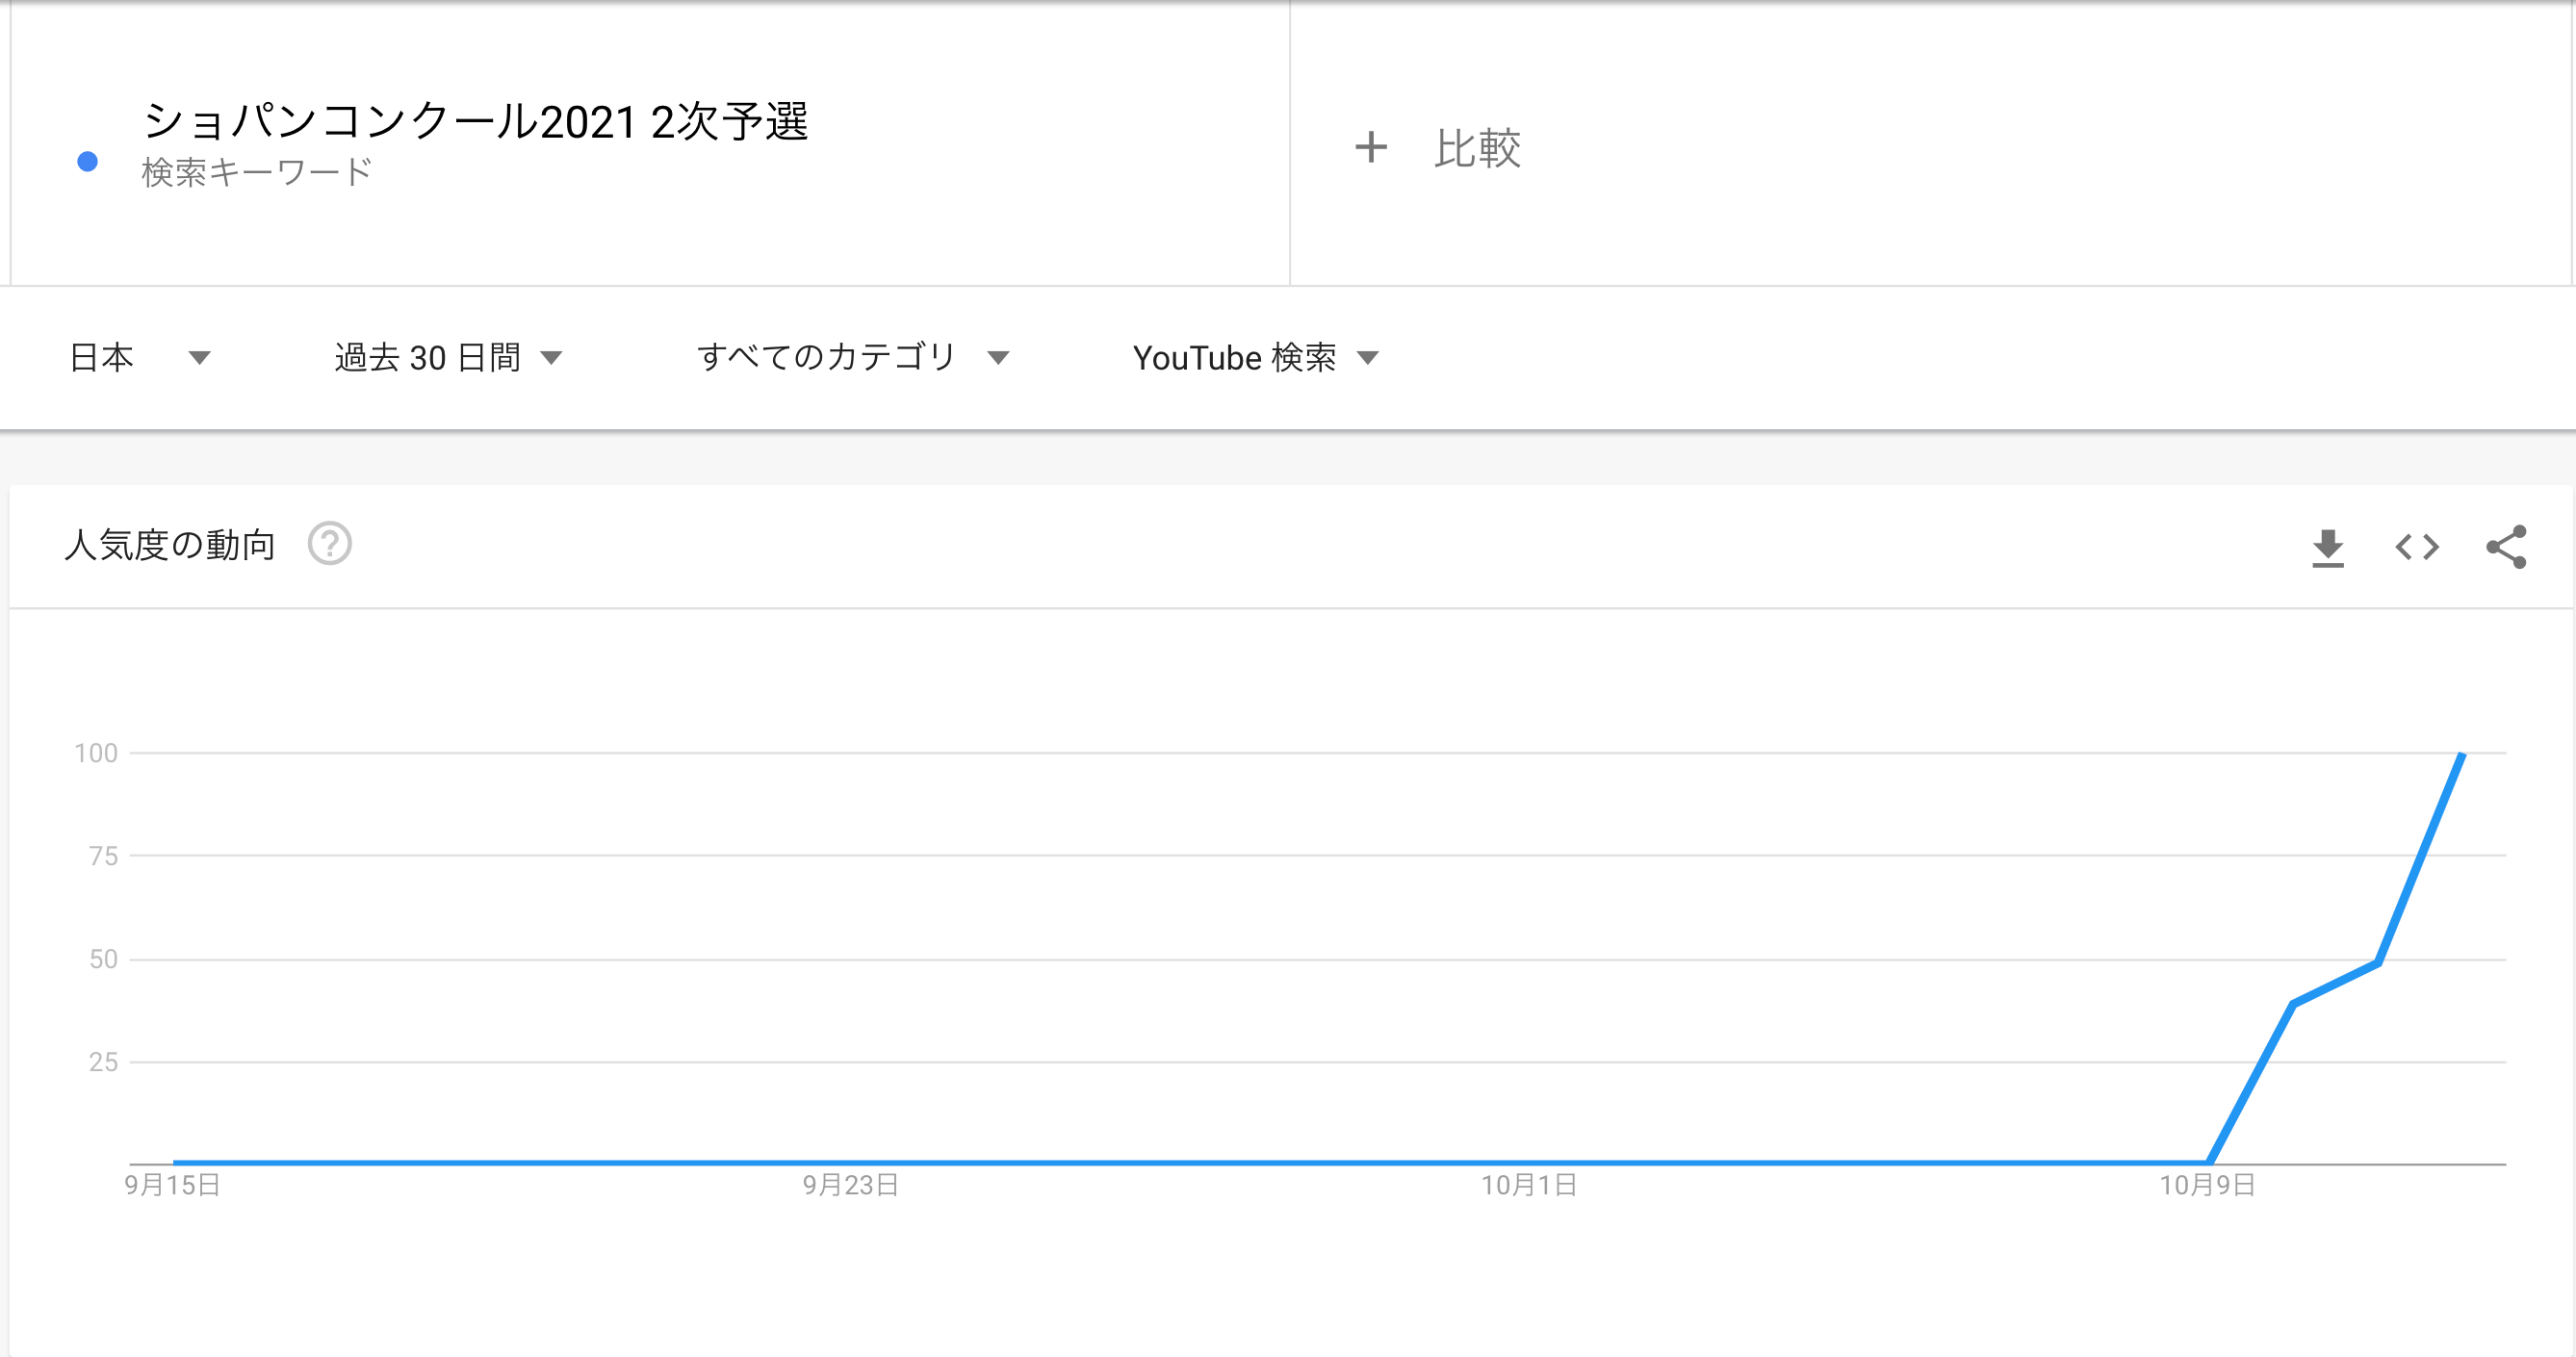 YouTube-Chopin Competition-google trend